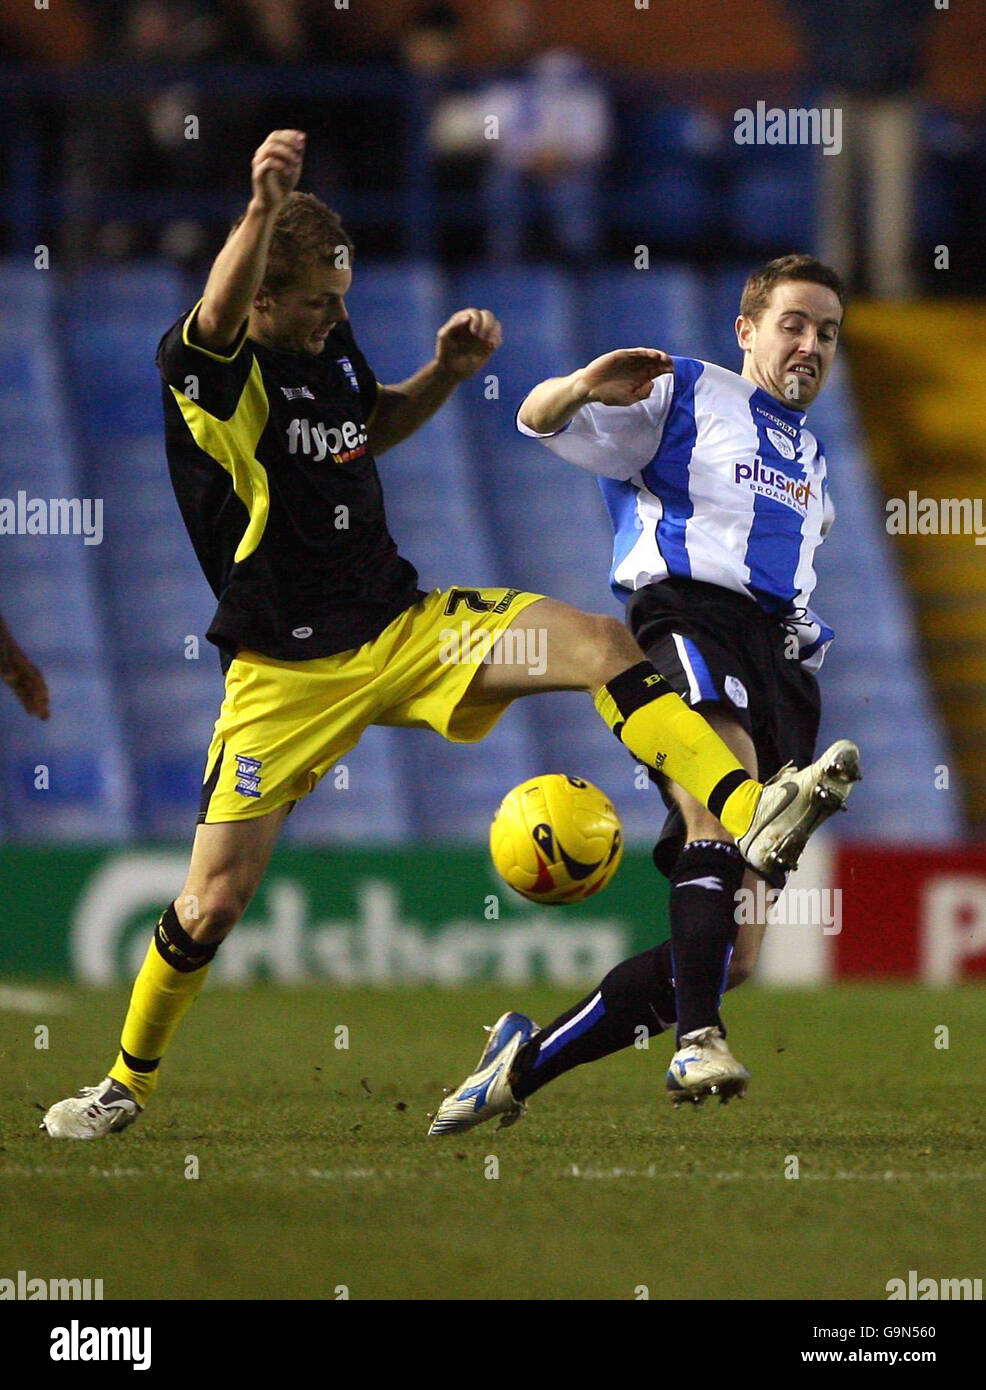 Sheffield Wednesday's Steven MacLean (right) and Birmingham City's Sebastian Larsson battle for the ball during the Coca-Cola Championship match at Hillsborough, Sheffield. Stock Photo